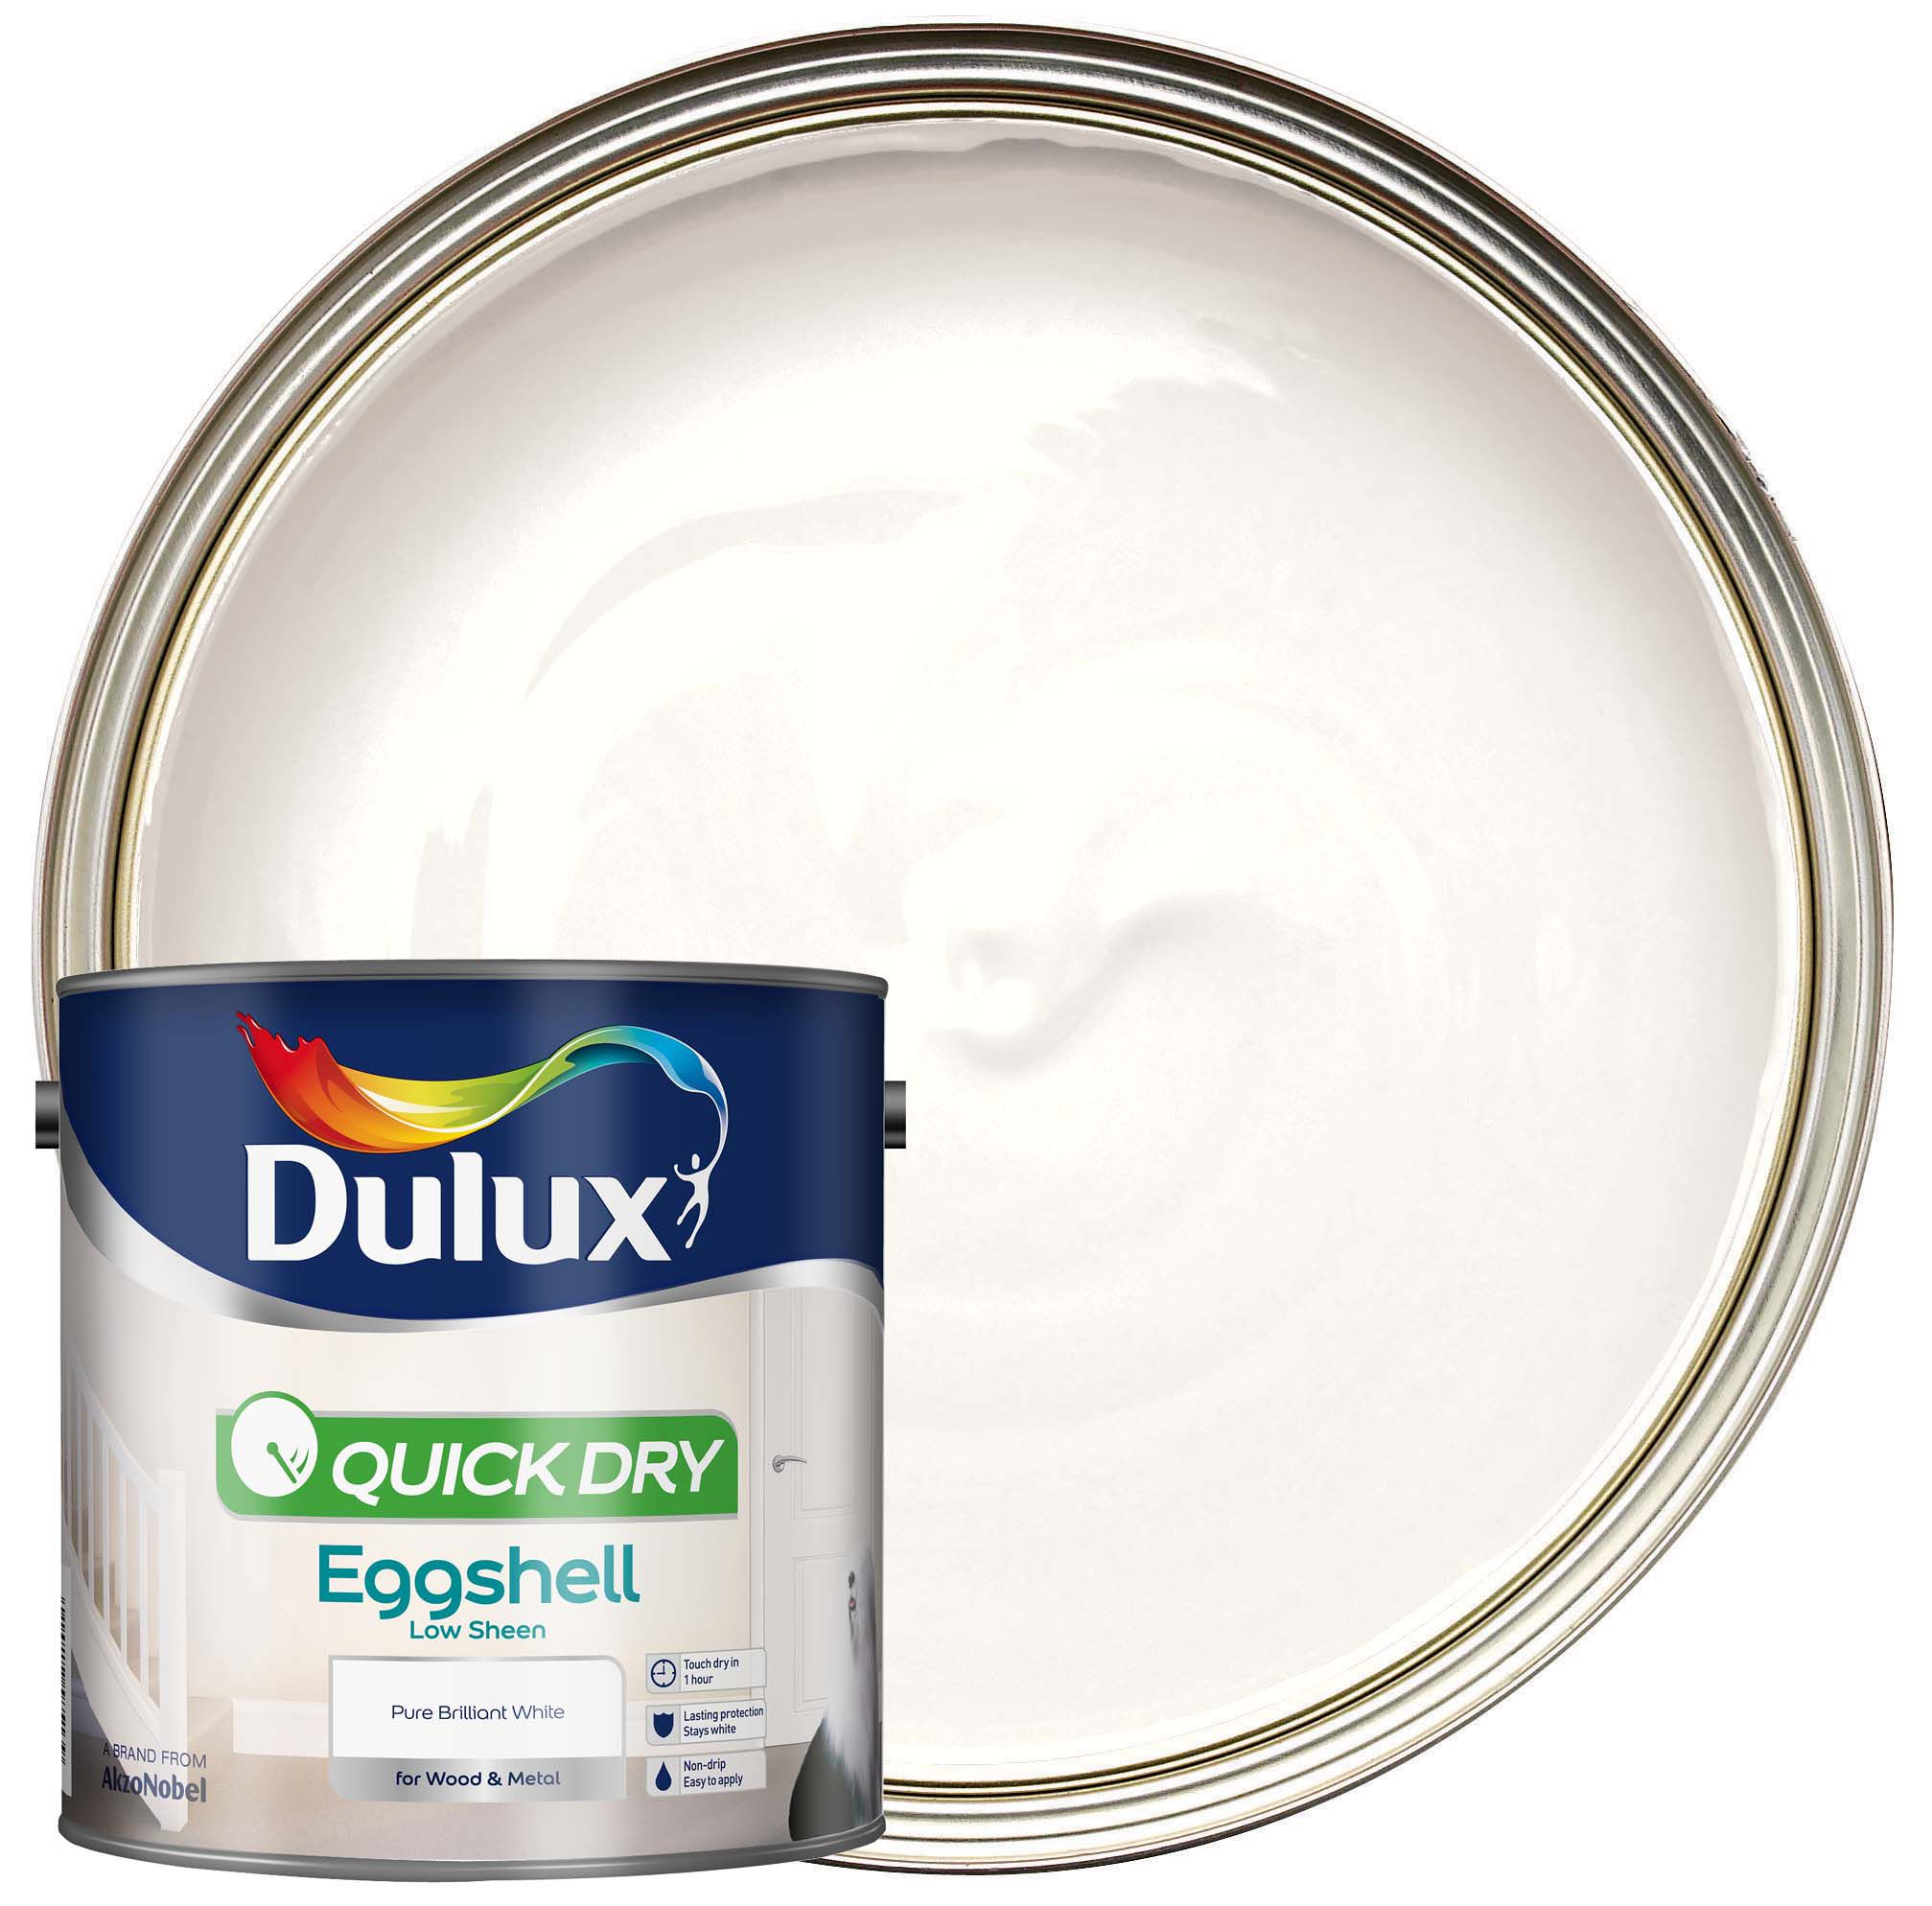 Image of Dulux Quick Dry Eggshell Paint - Pure Brilliant White - 2.5L